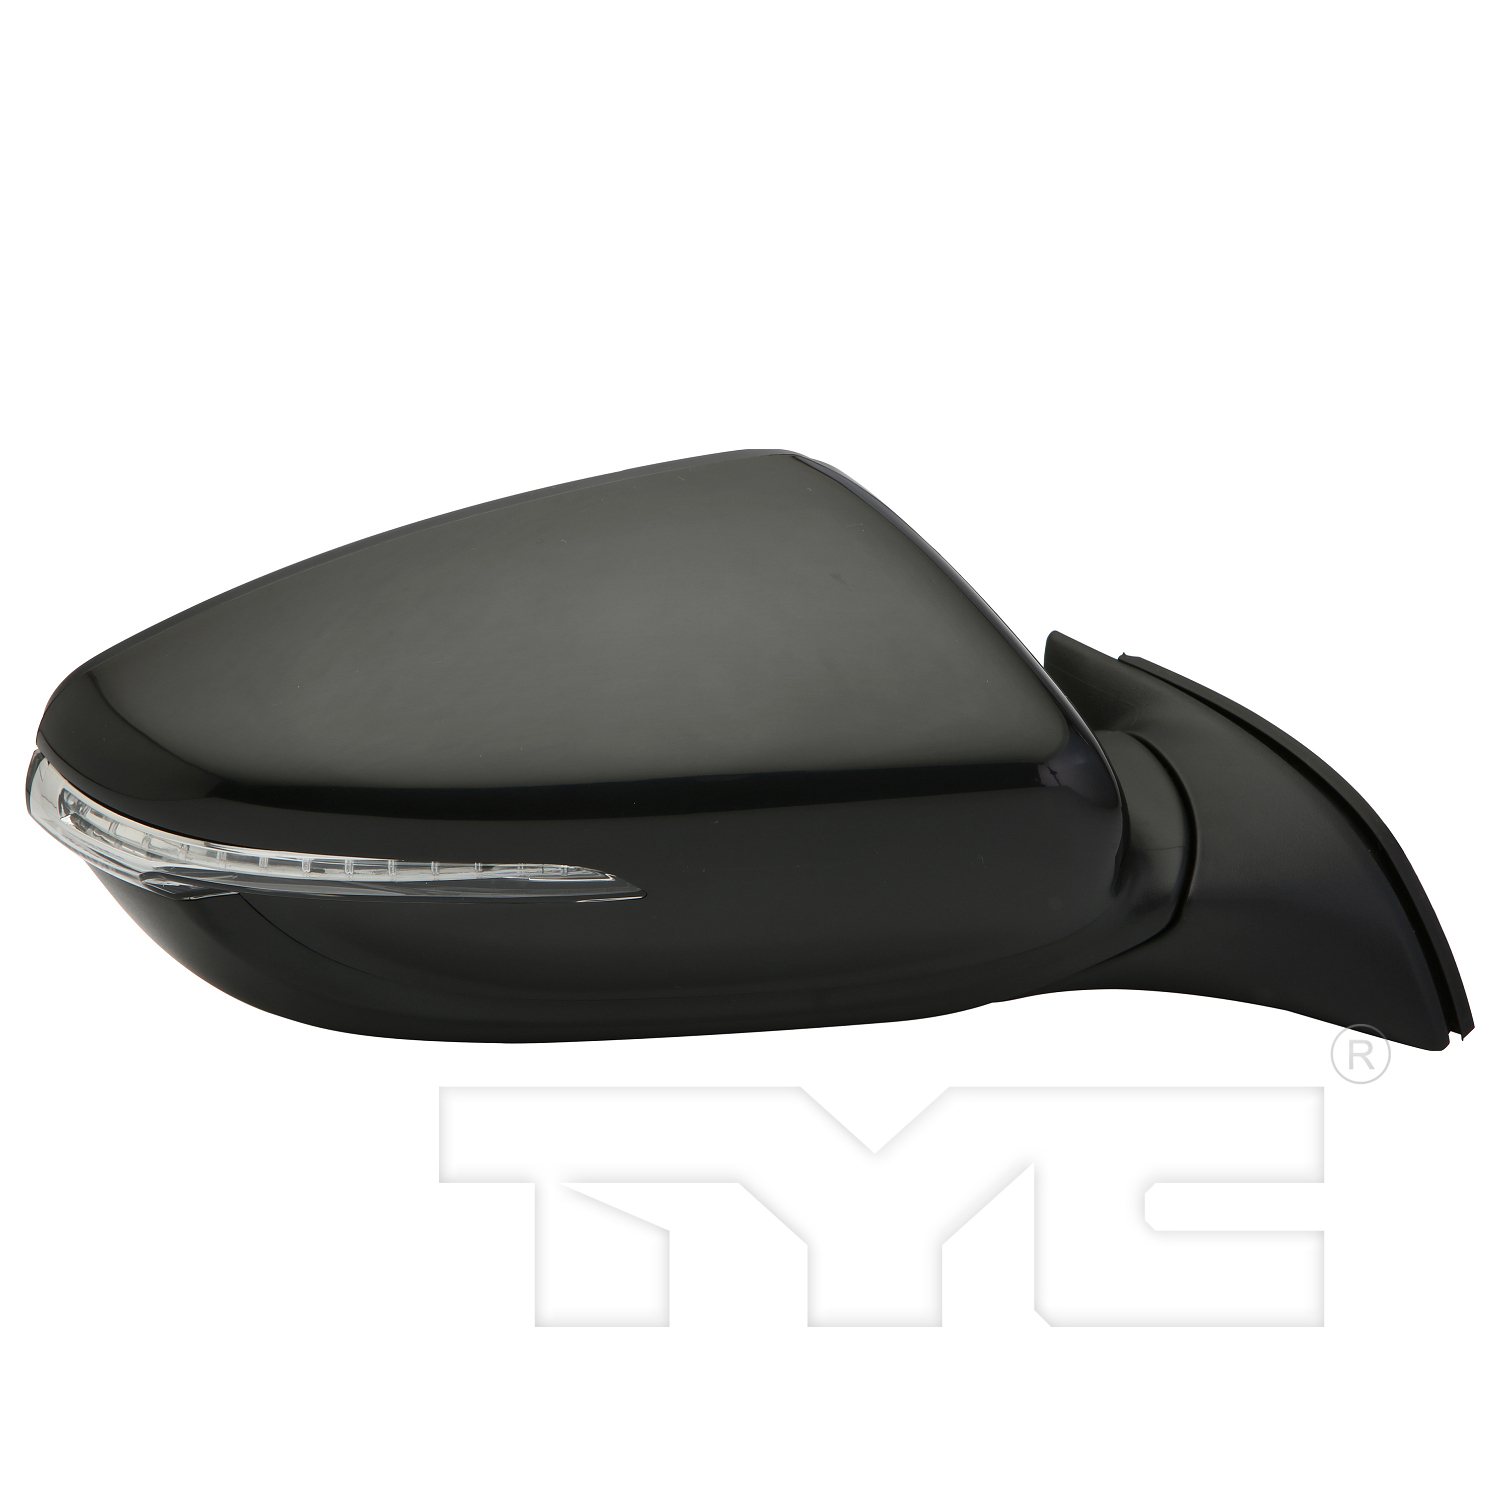 Aftermarket MIRRORS for KIA - FORTE, FORTE,17-18,RT Mirror outside rear view